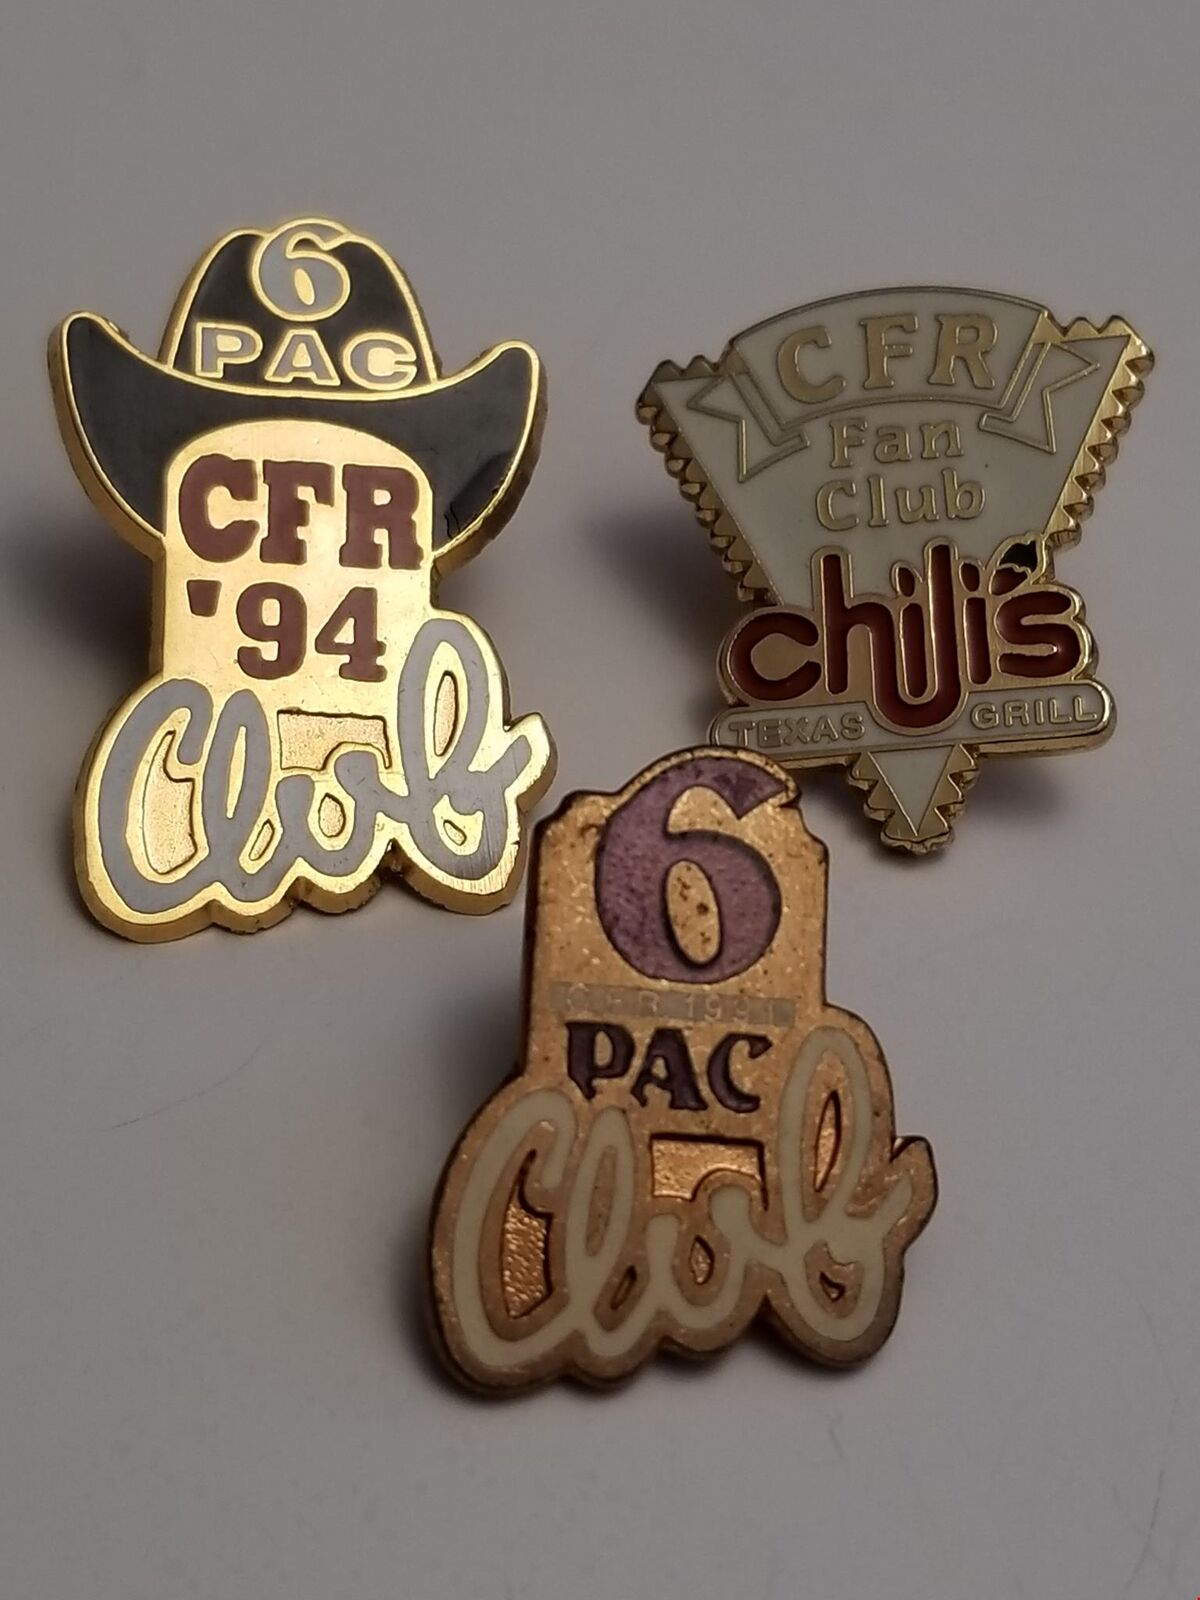 CFR 6 Pac Club Chili\'s Canadian Finals Rodeo Lot of 3 Lapel Pins 1965